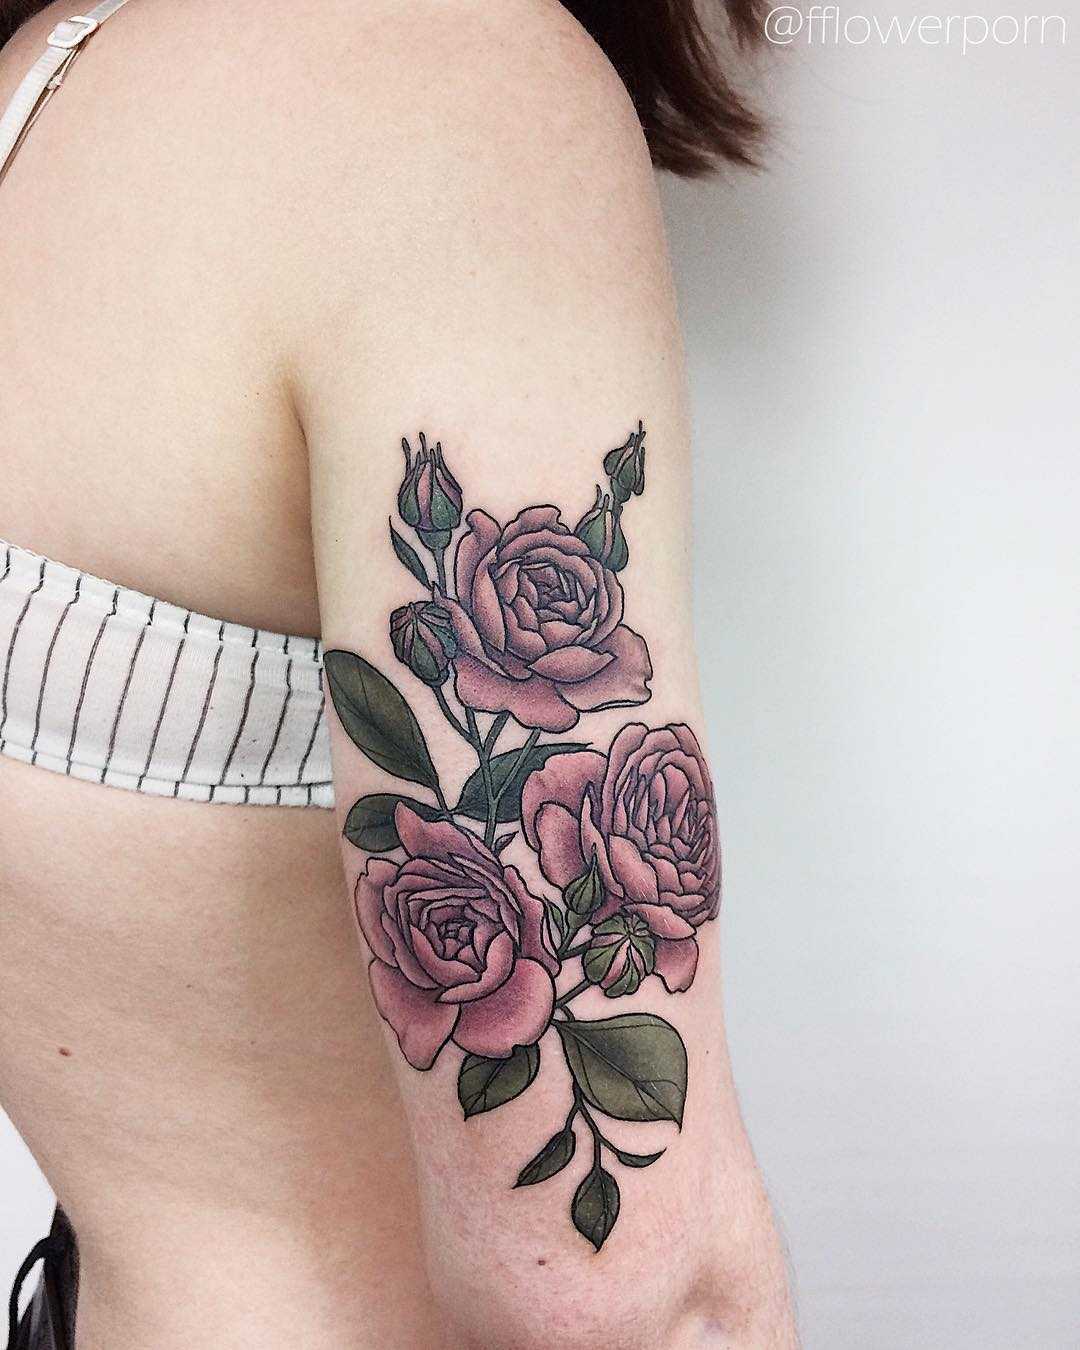 Garden roses tattoo on the arm